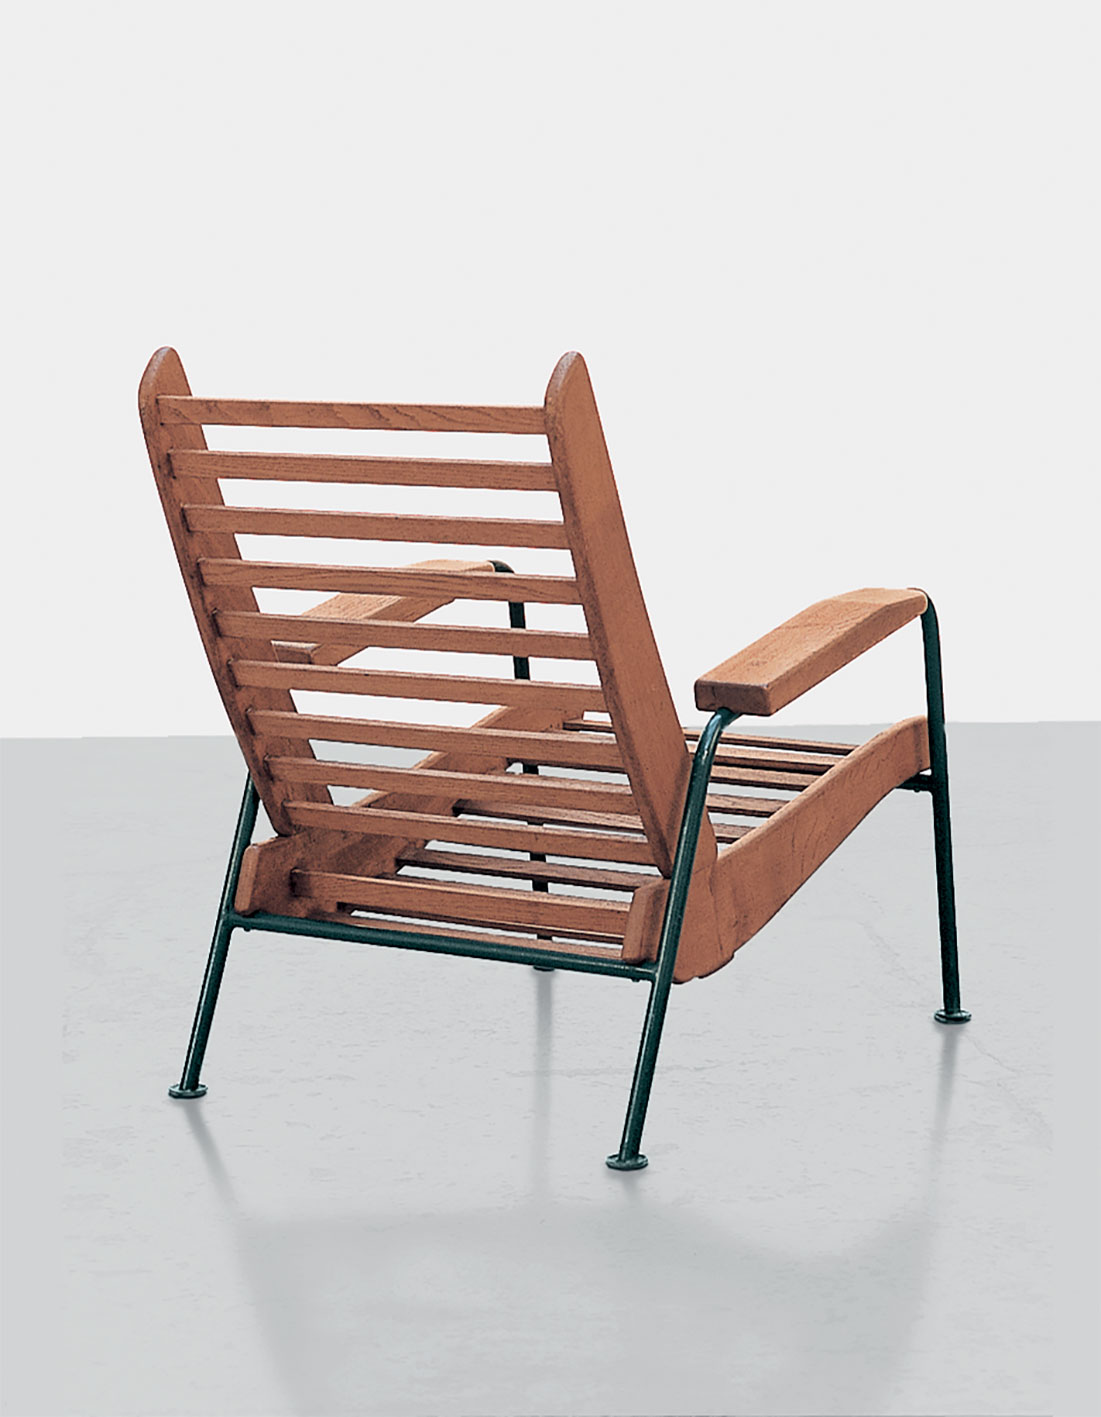 Visiteur wood slats armchair, variant with rounded metal end fittings ca. 1945.